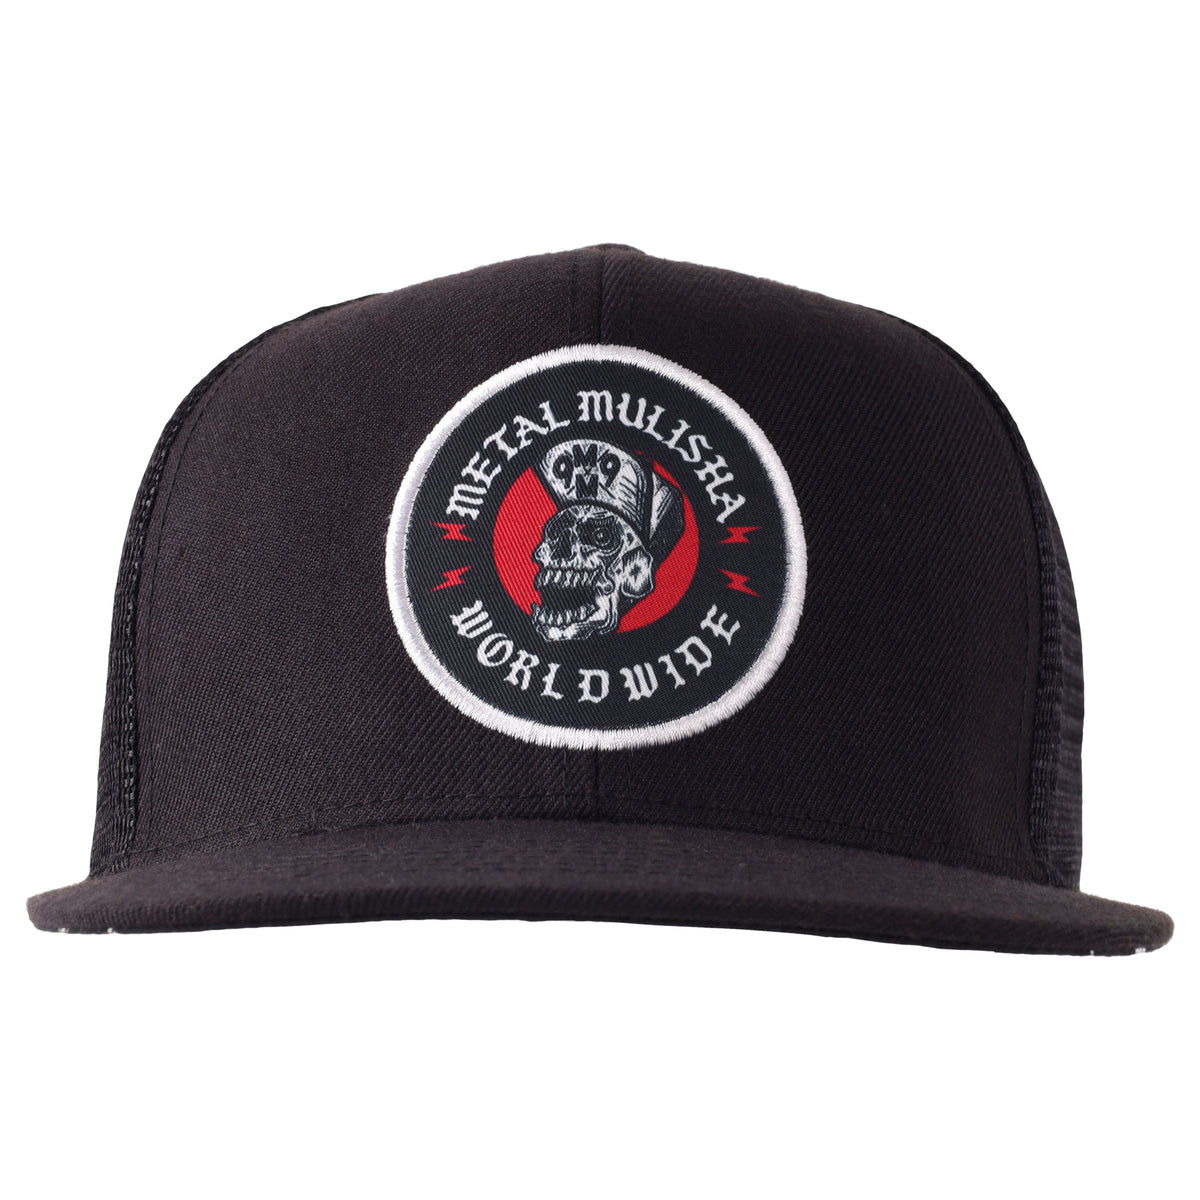 FLIPPED OUT SNAPBACK HAT